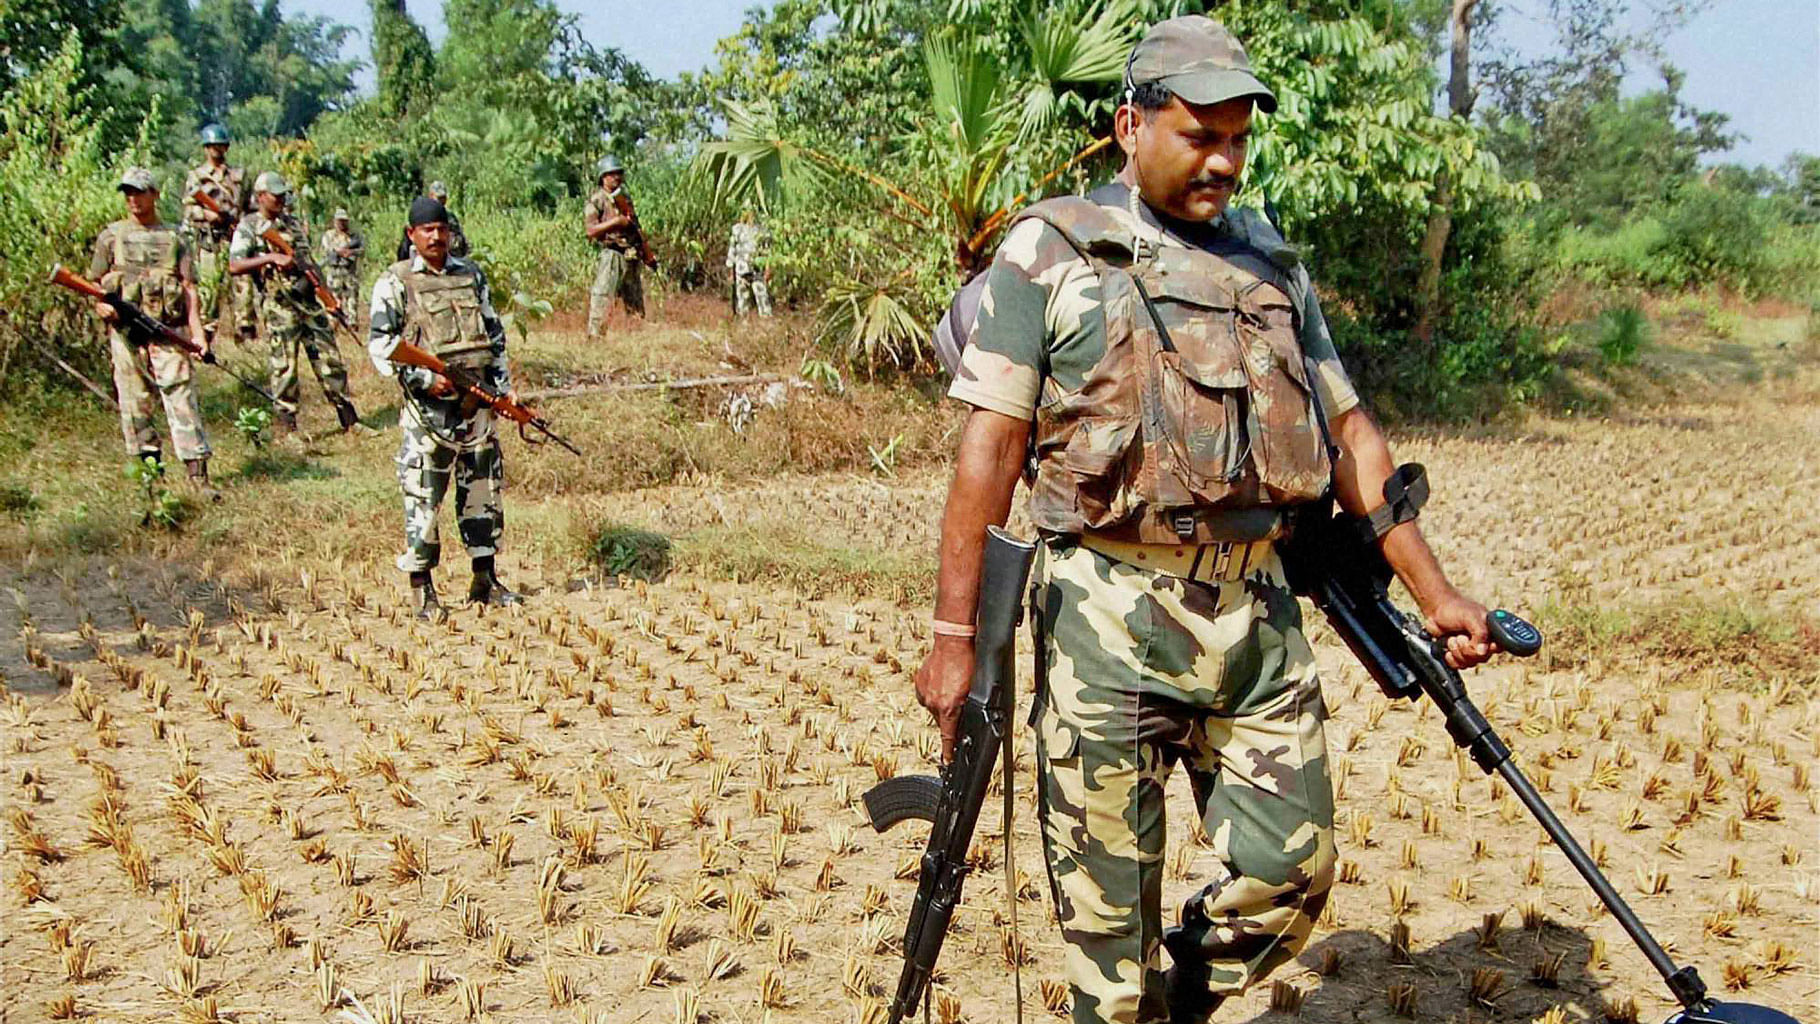 Central paramilitary force jawans  conduct a security check on the eve of the first phase of assembly elections in  Junglemahal,  Bankura district, of West Bengal on Sunday. (Photo: PTI)